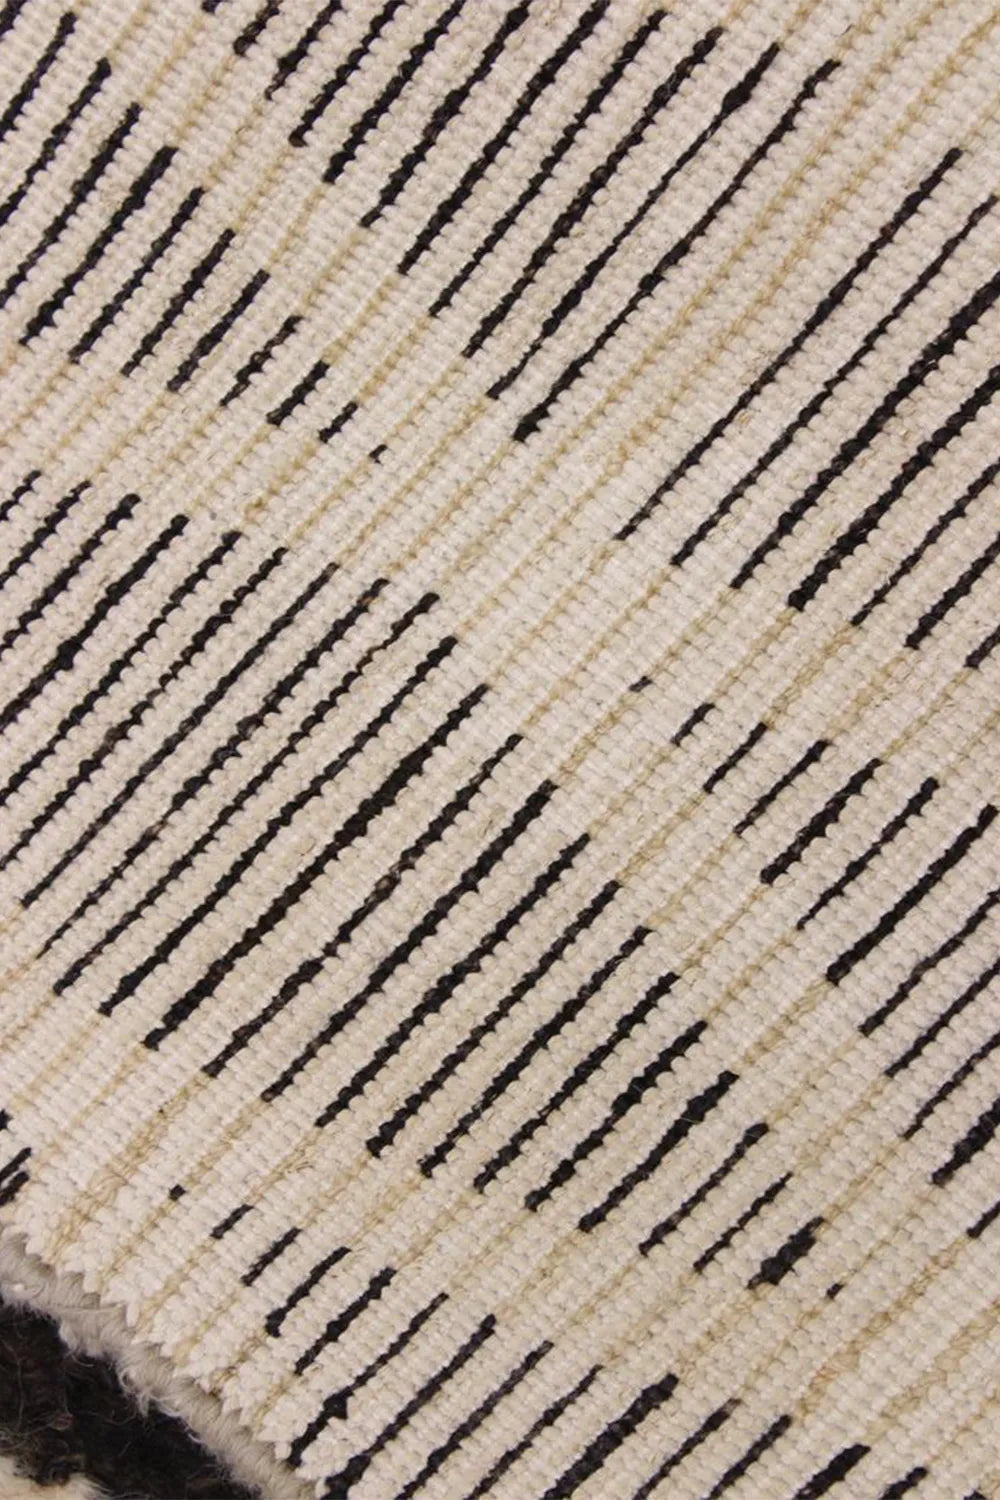 Artisan-crafted shag carpet in black and white, perfect for contemporary homes.